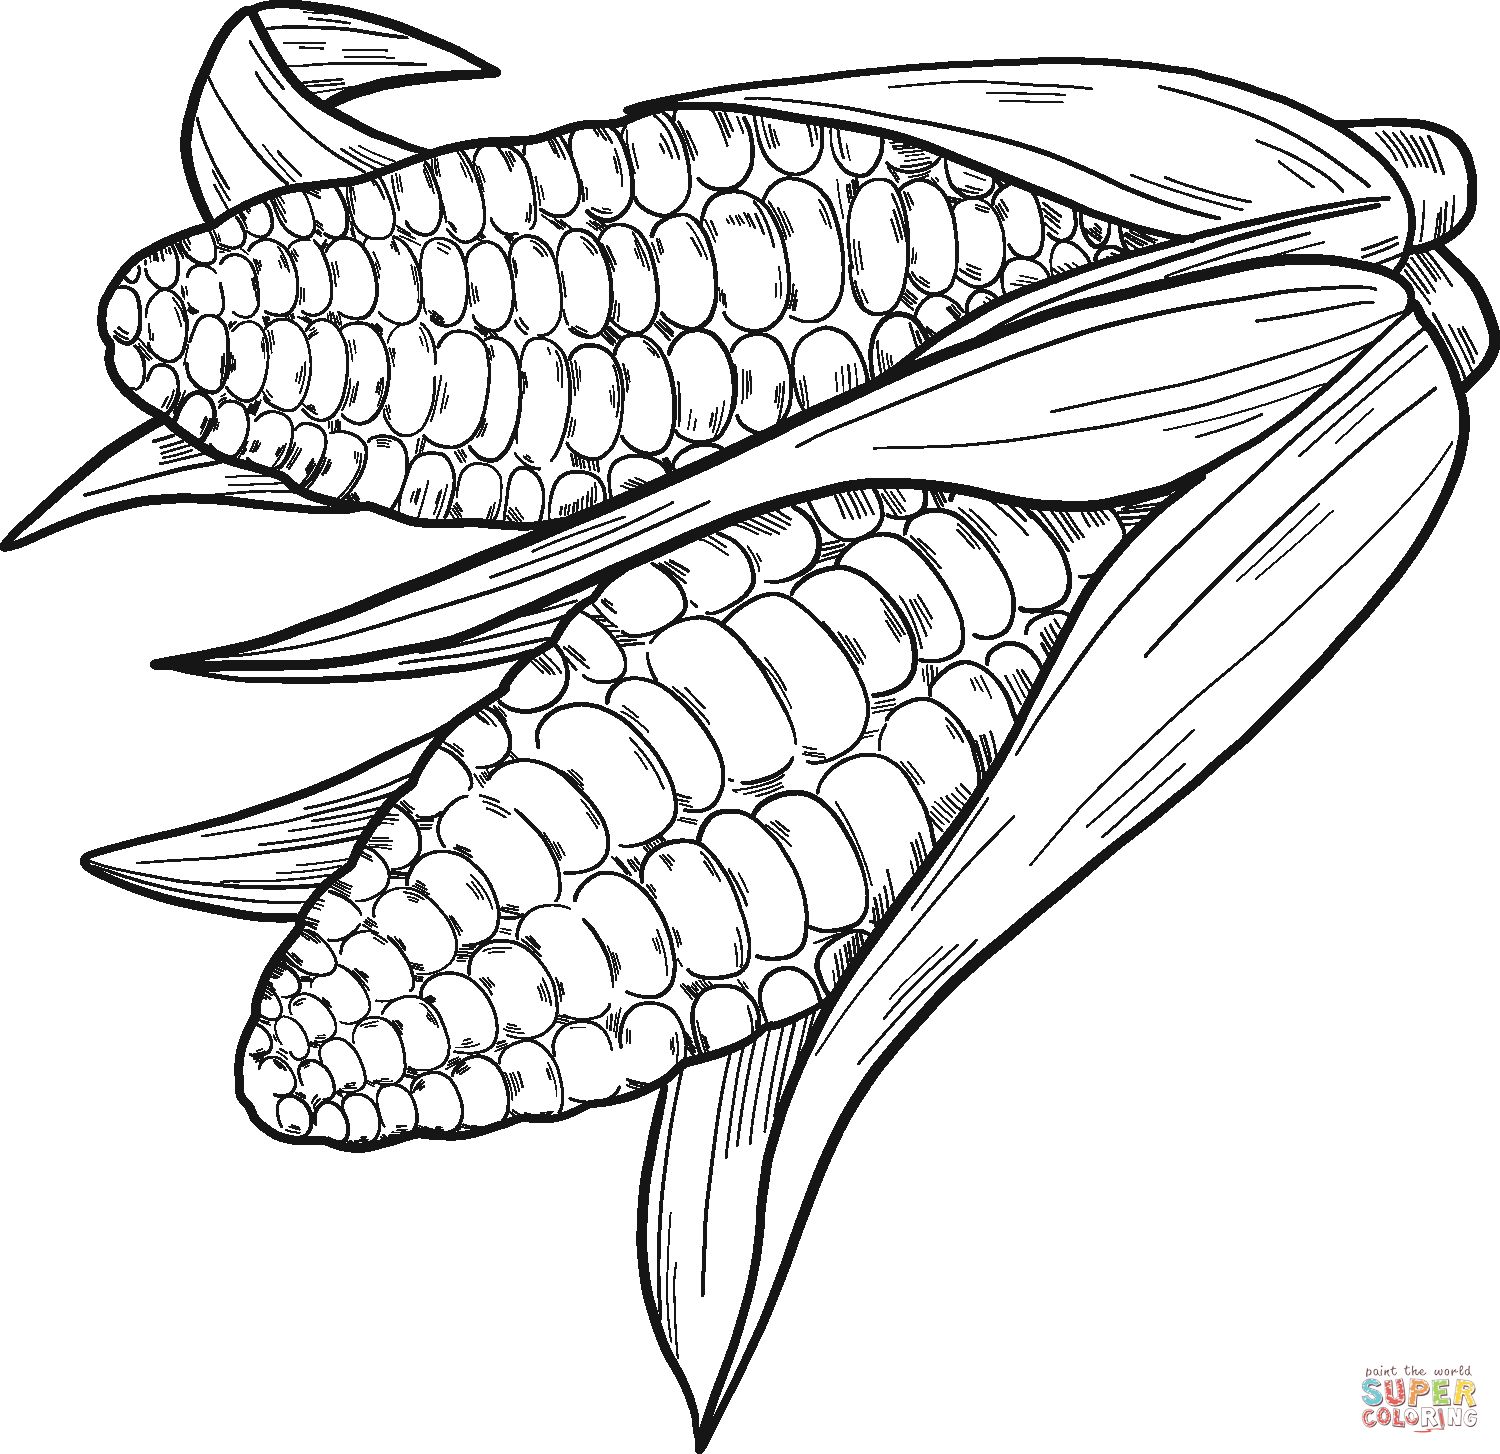 Corn cobs coloring page free printable coloring pages